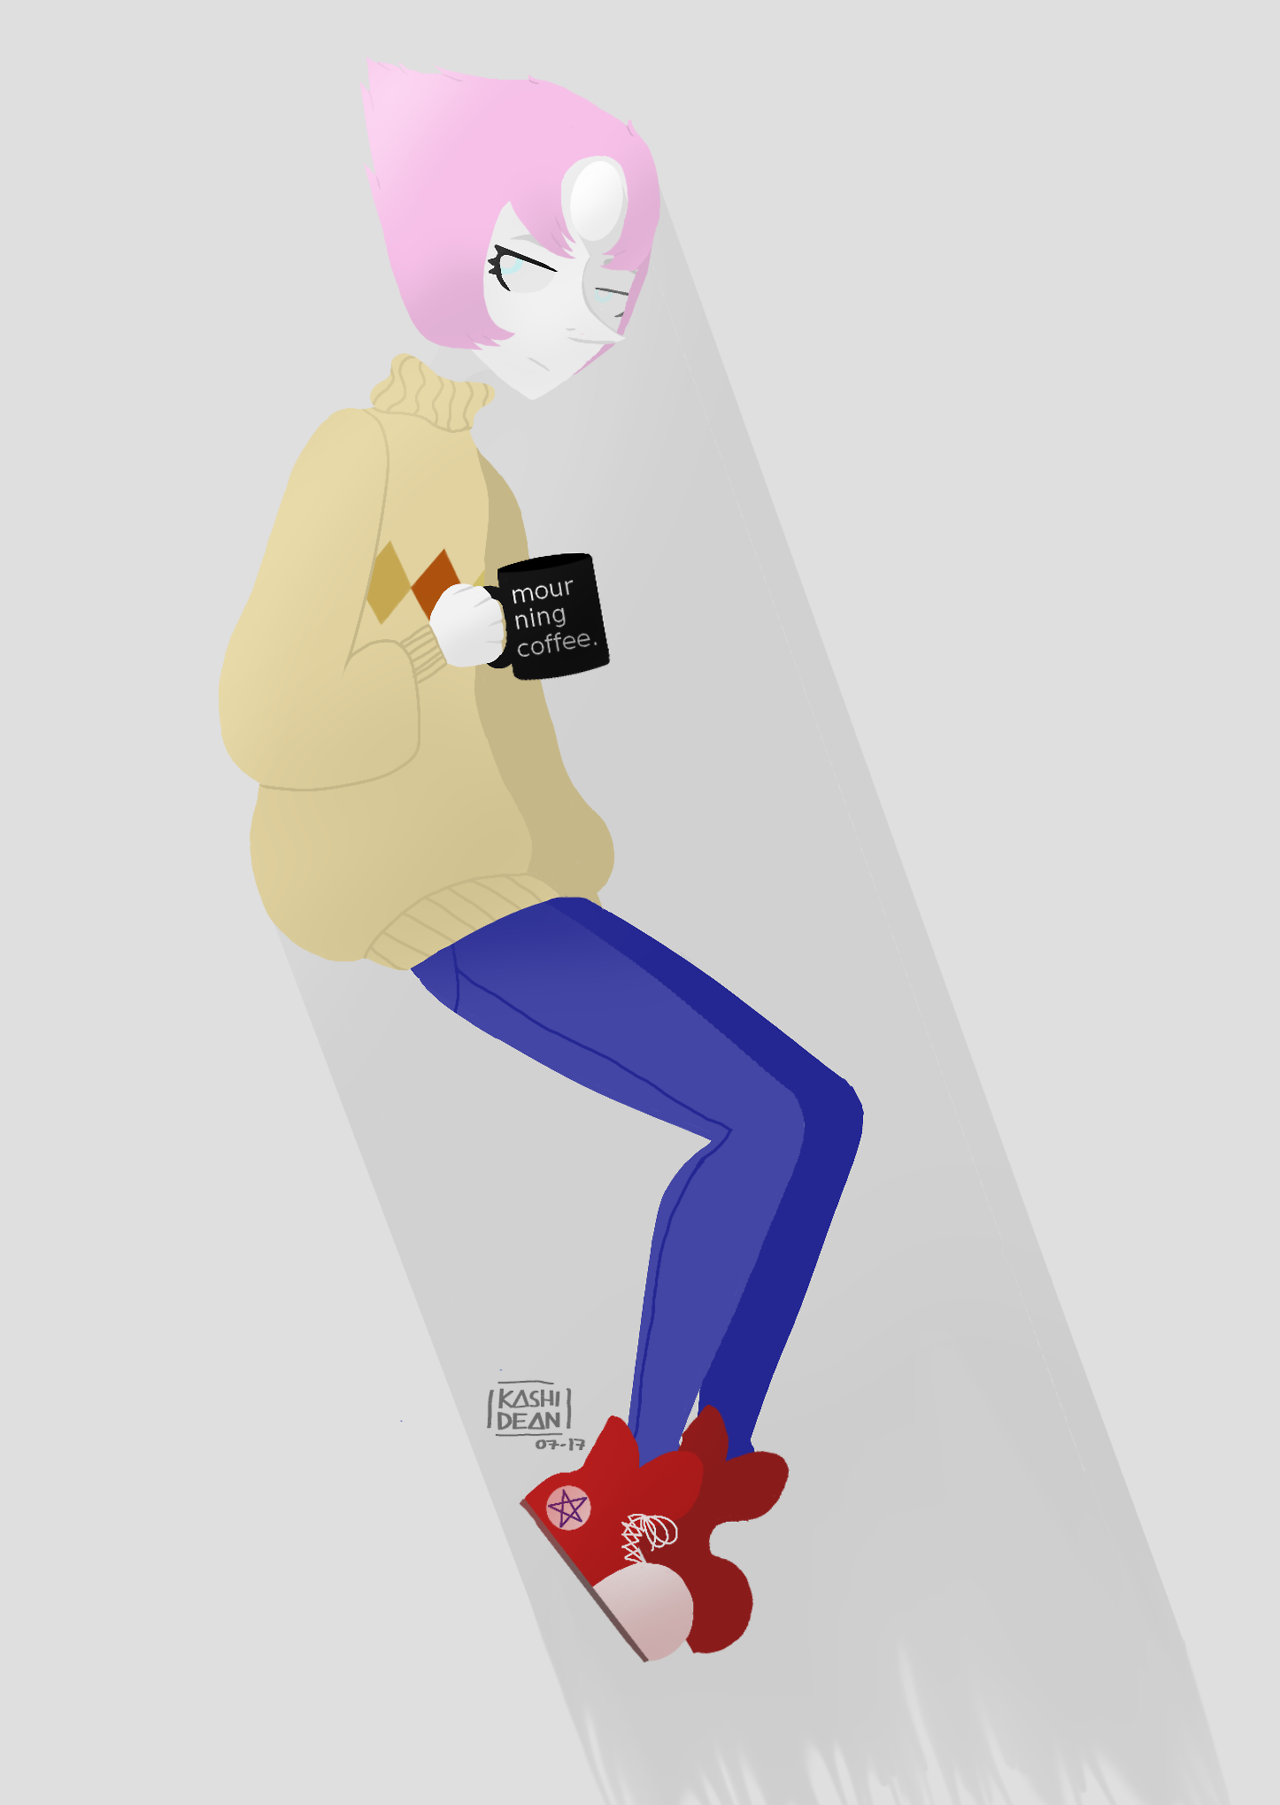 ah yes, uploading at 00:27 AM. healthy habits if i ever saw them

 i wanted to paint but then i got lazy so i did a lineless bird mom. holy fuck it was work to do, but it took me like three days so heh. not that much i guess.